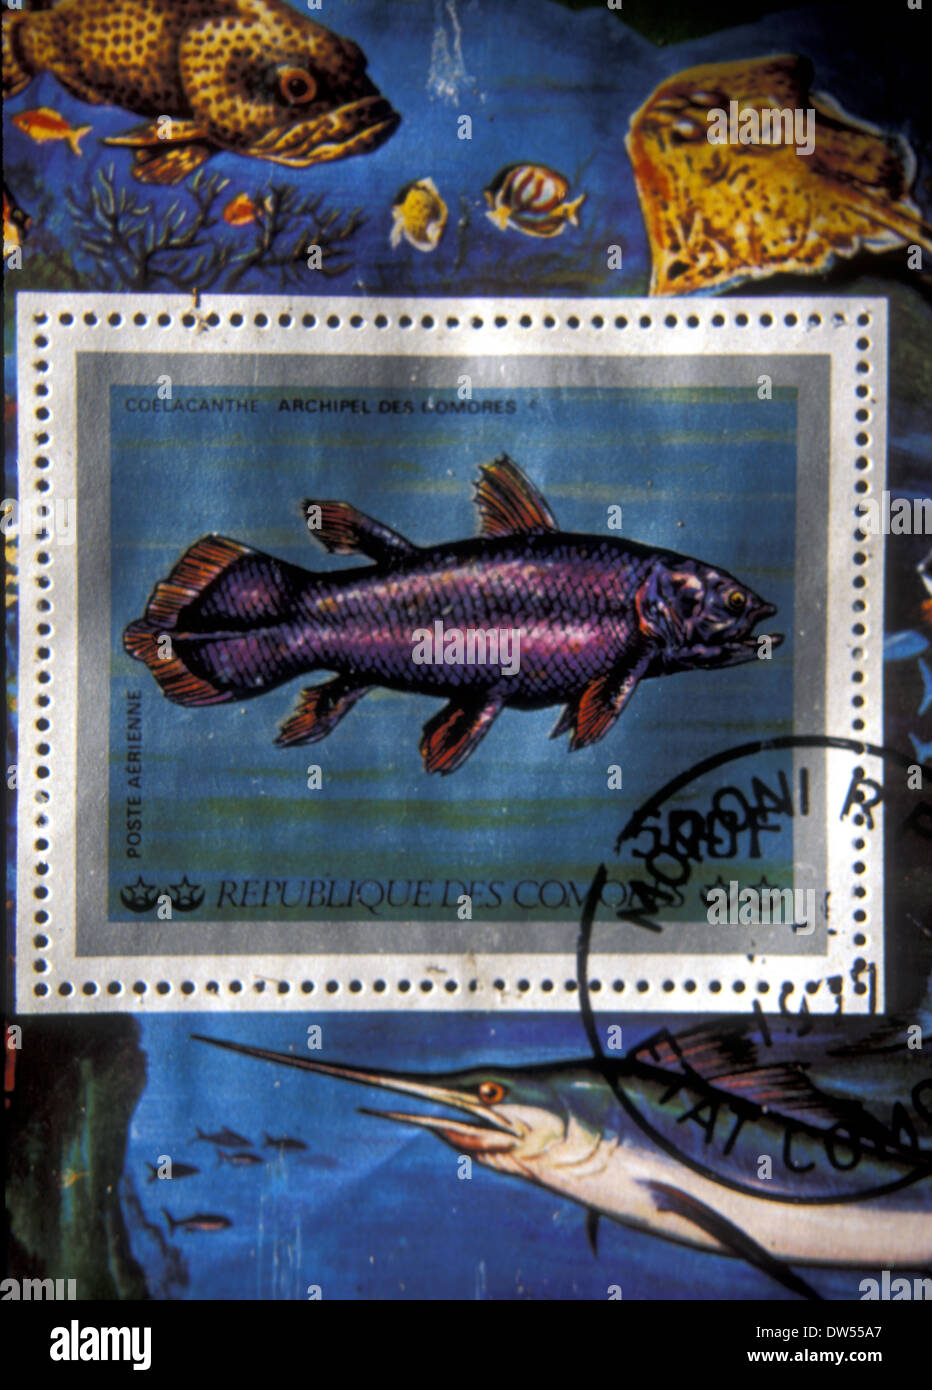 Commemorative postage stamp from the Comoros Islands featuring the coelacanth or prehistoric fish re-discovered off South Africa in 1938, Stock Photo